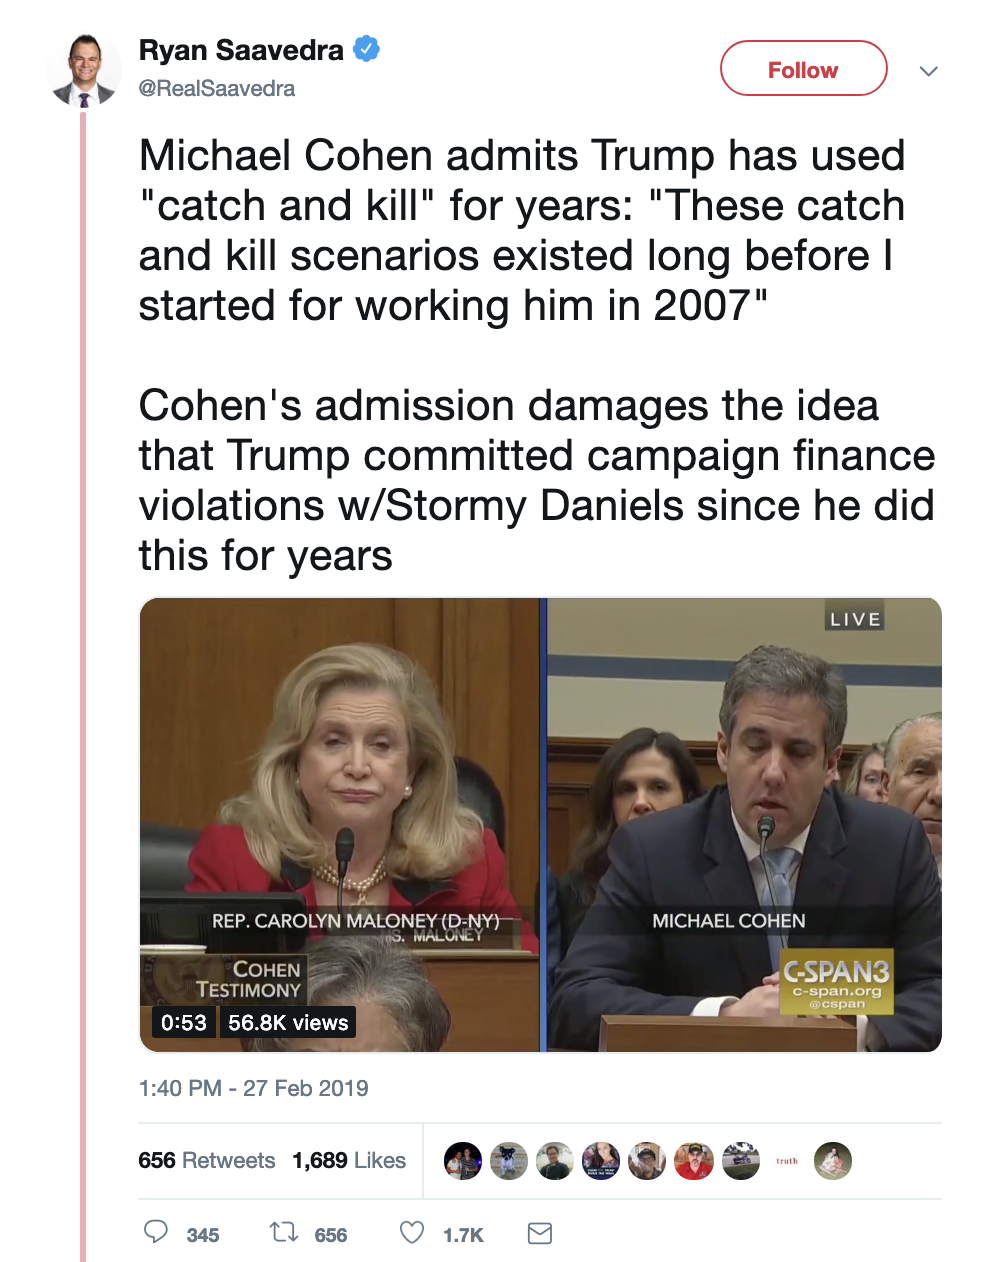 Screen-Shot-2019-02-27-at-2.51.42-PM Stormy Daniels Dramatically Messages Michael Cohen During Hearing (IMAGES) Corruption Crime Donald Trump Election 2016 Mueller Politics Robert Mueller Russia Top Stories 